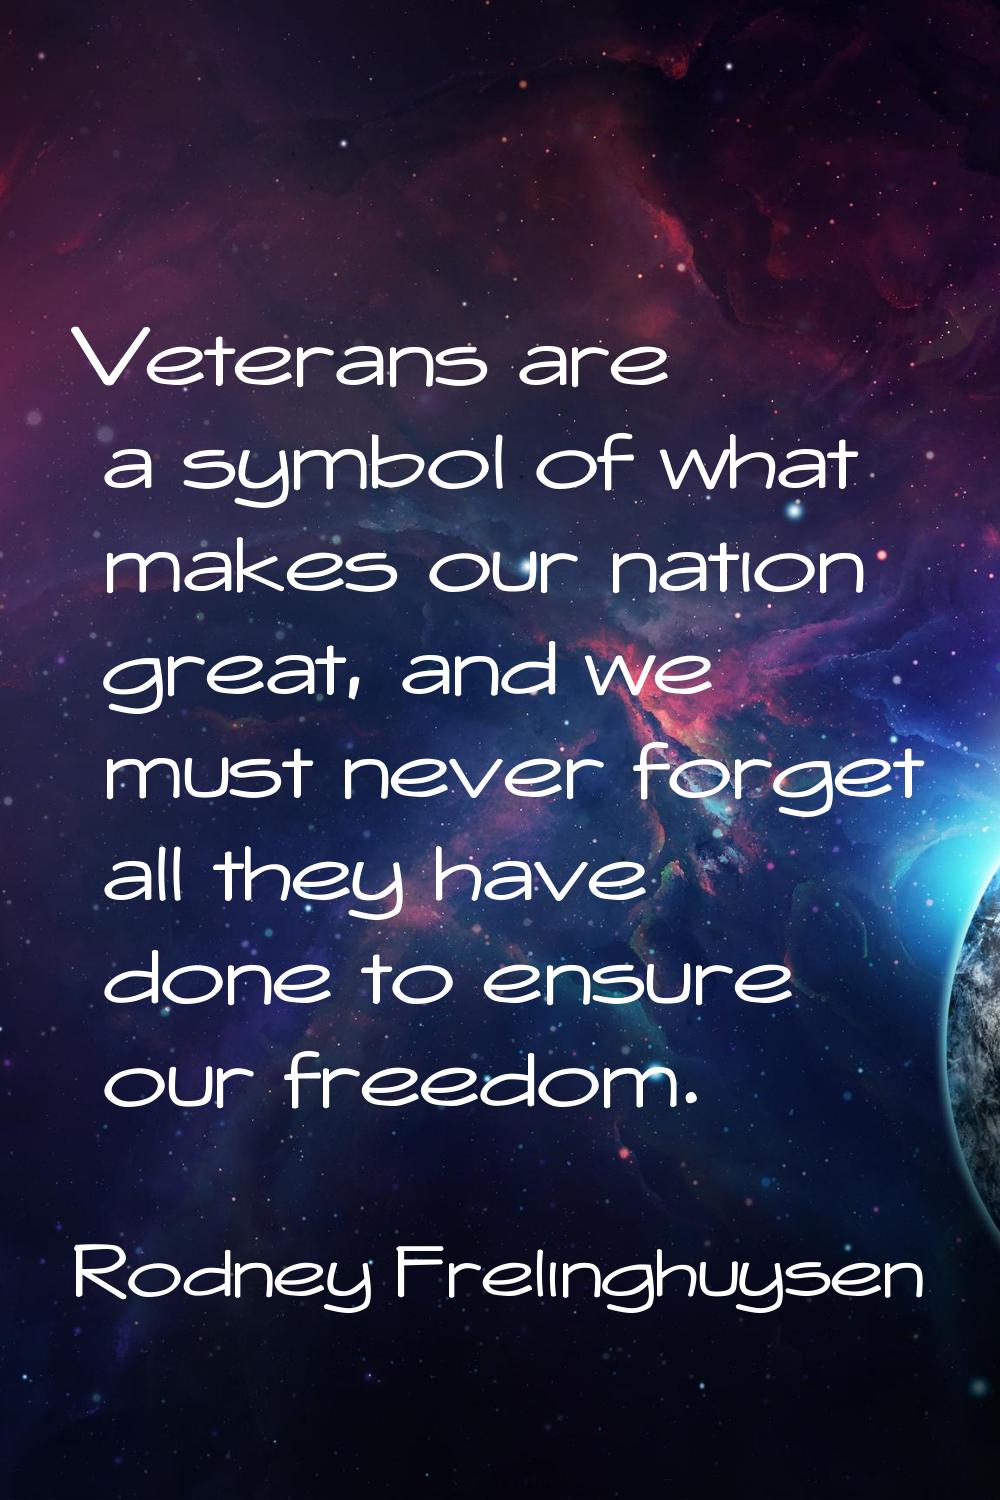 Veterans are a symbol of what makes our nation great, and we must never forget all they have done t